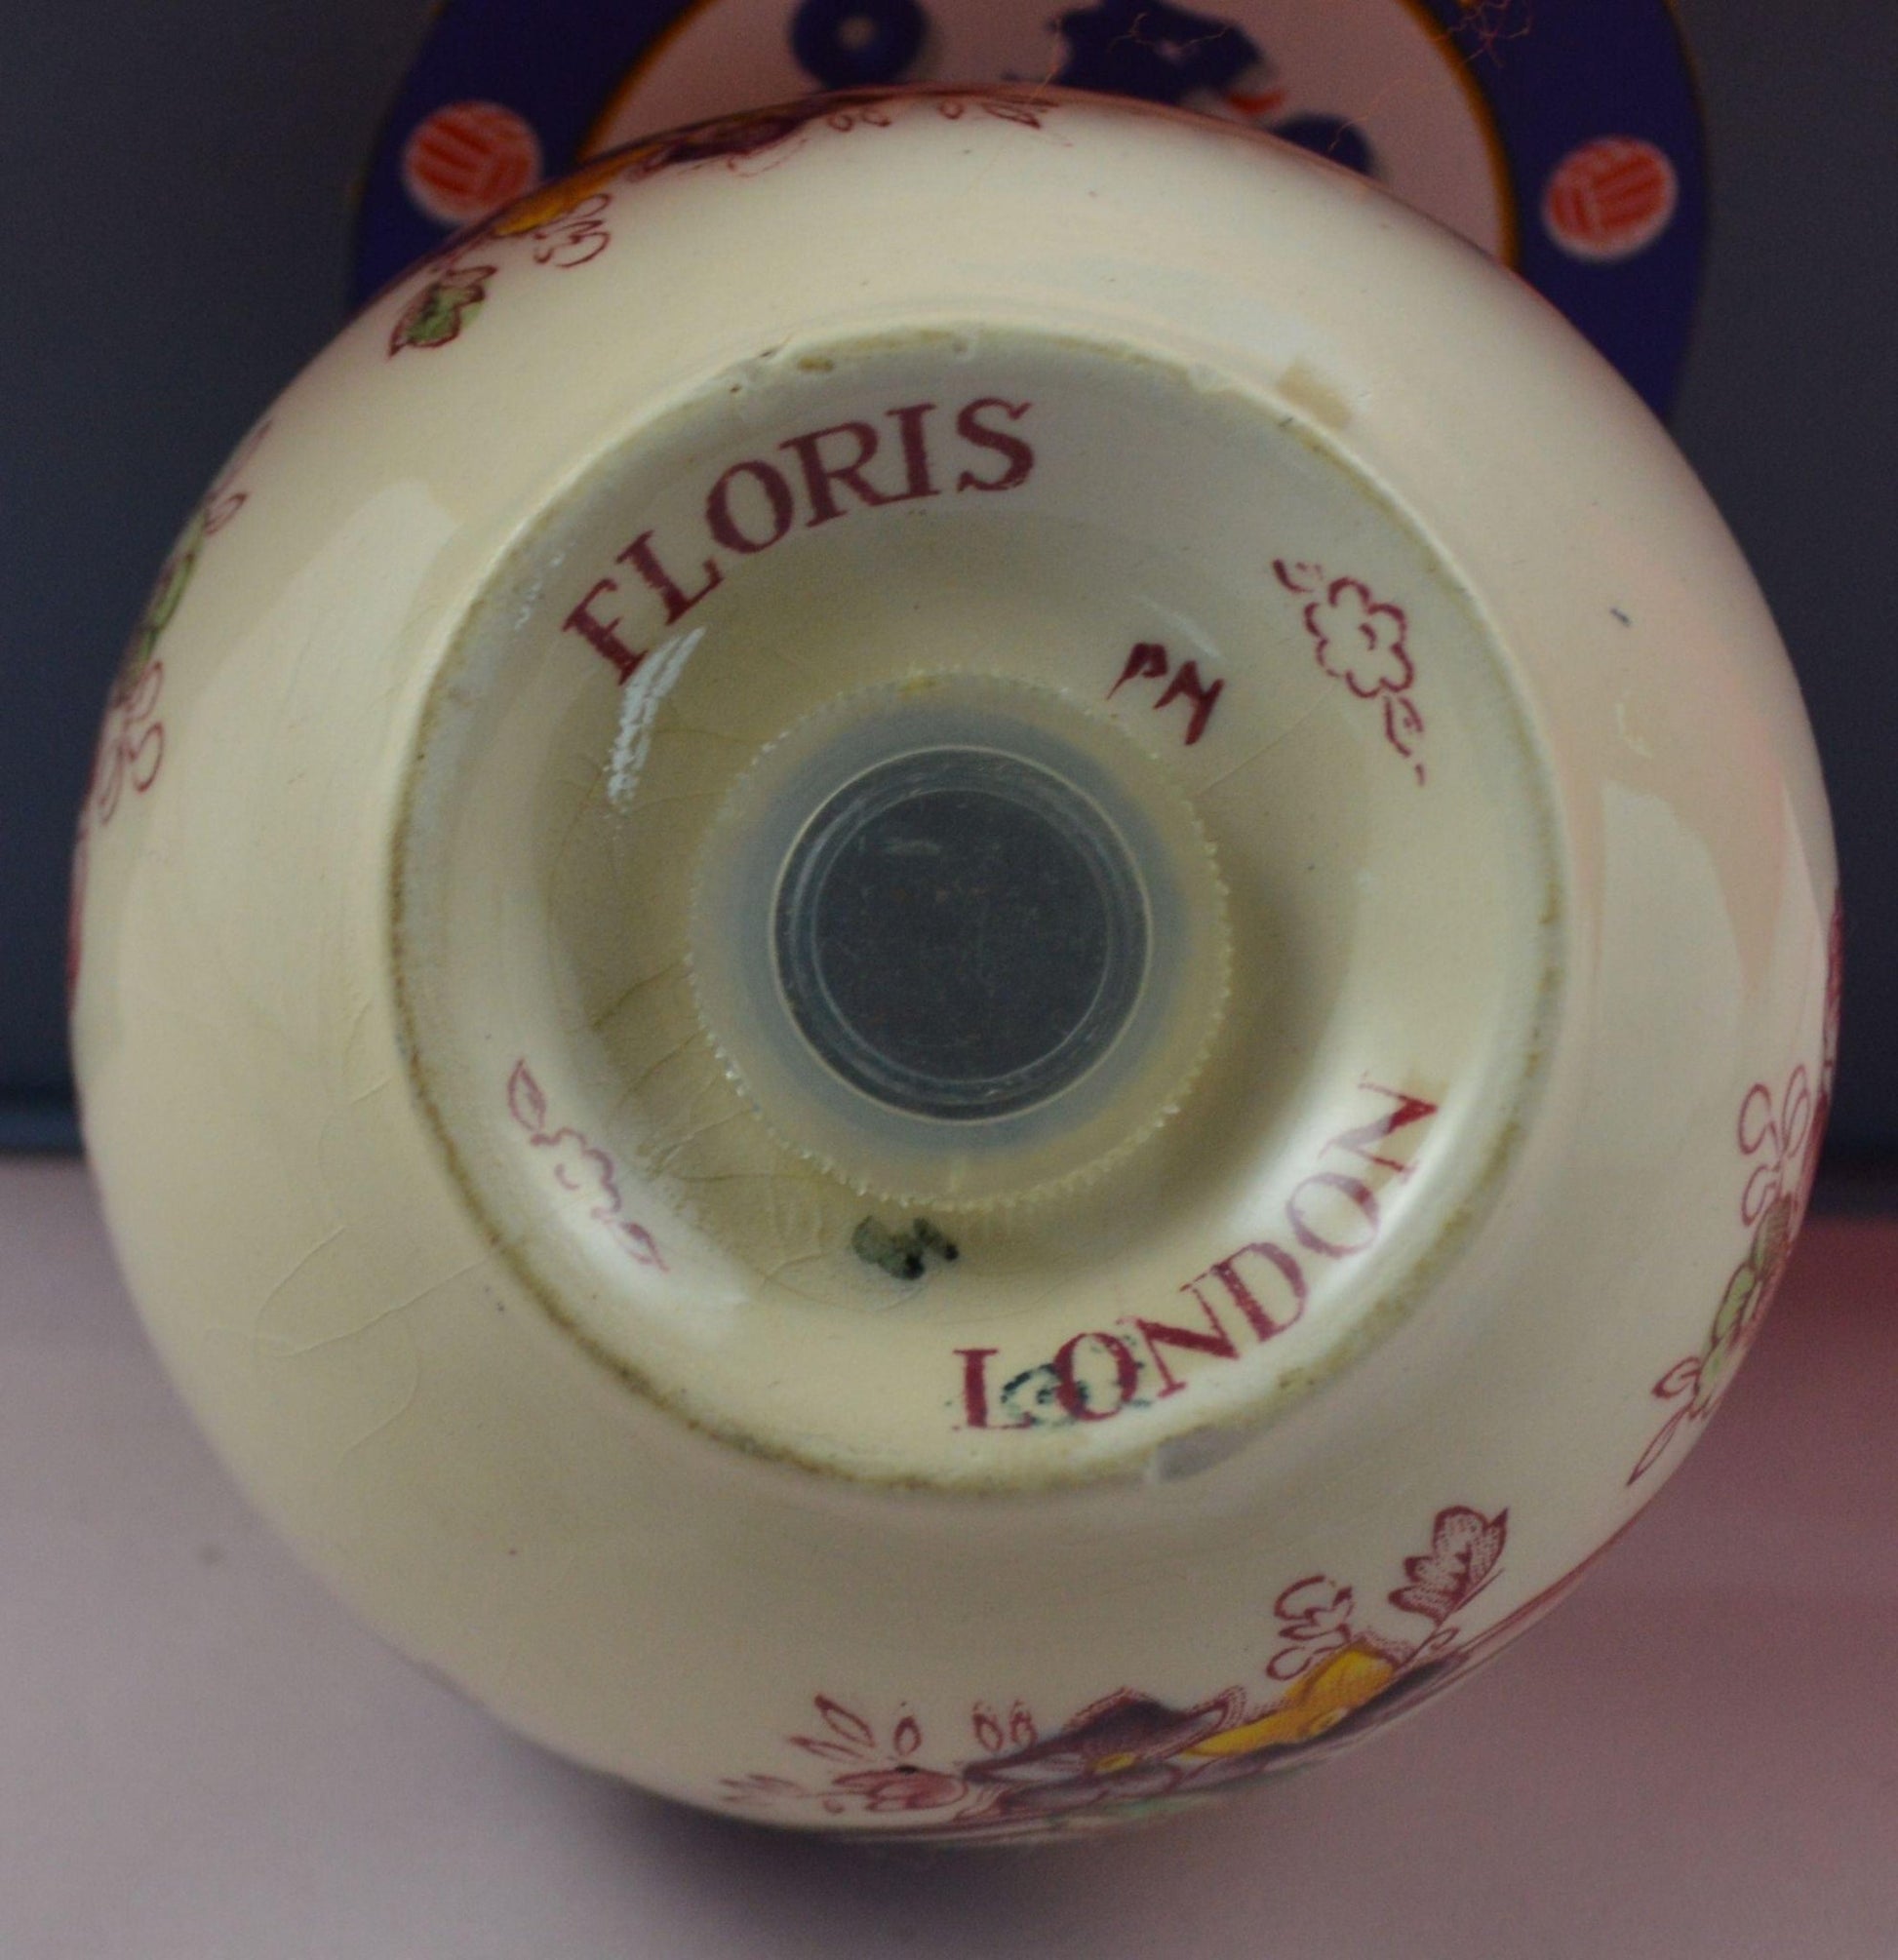 VINTAGE FLORIS OF LONDON POMANDER(PREVIOUSLY OWNED)GOOD CONDITION - TMD167207